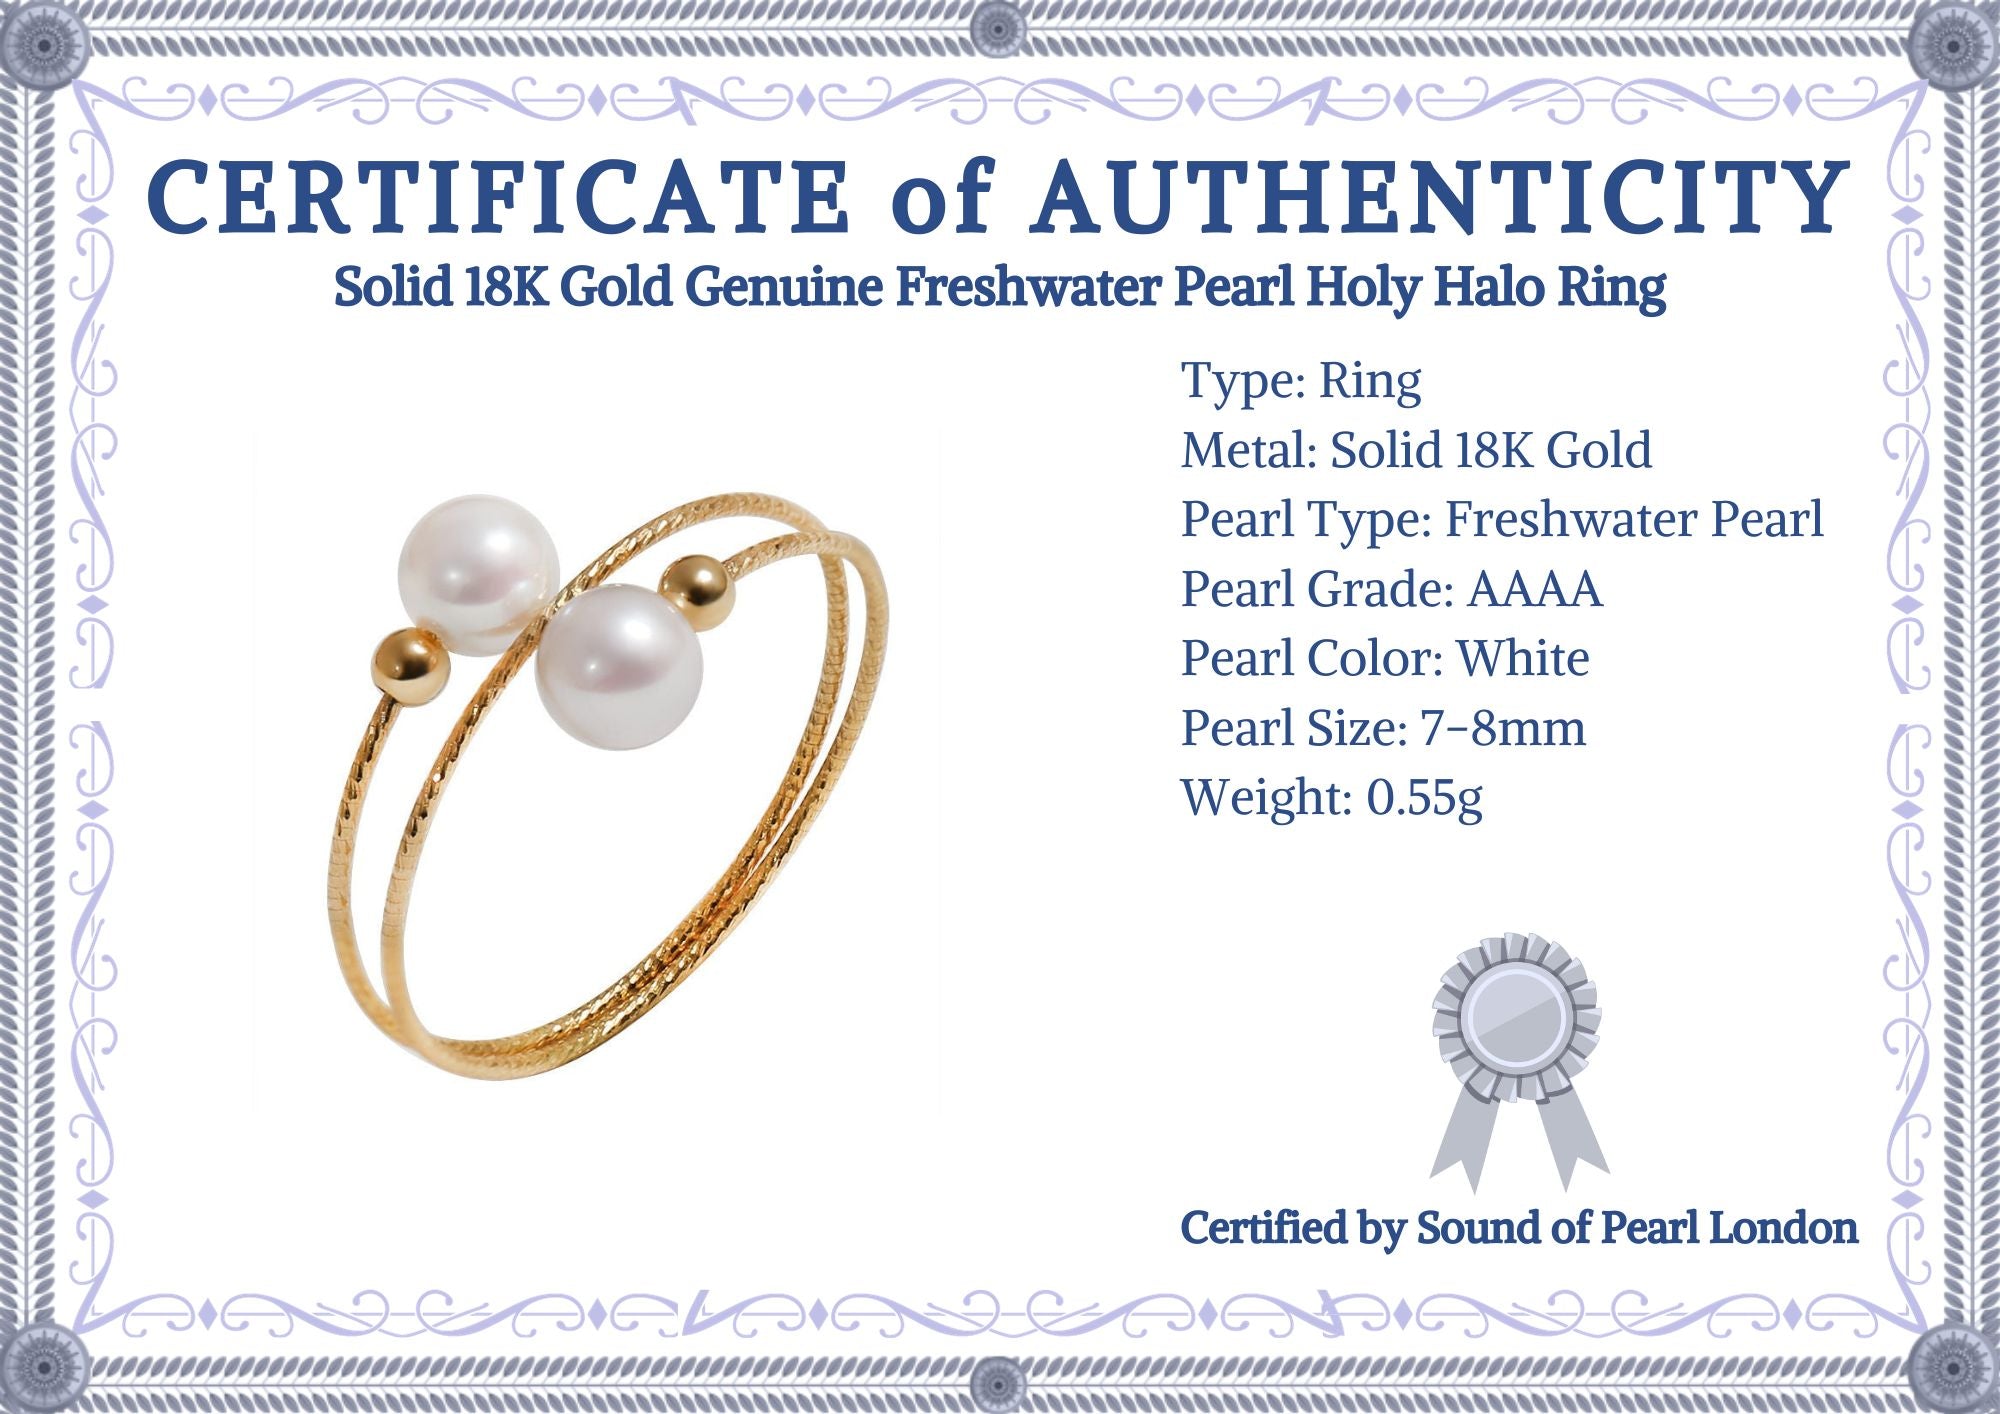 Solid 18K Gold Genuine Freshwater Pearl Holy Halo Ring